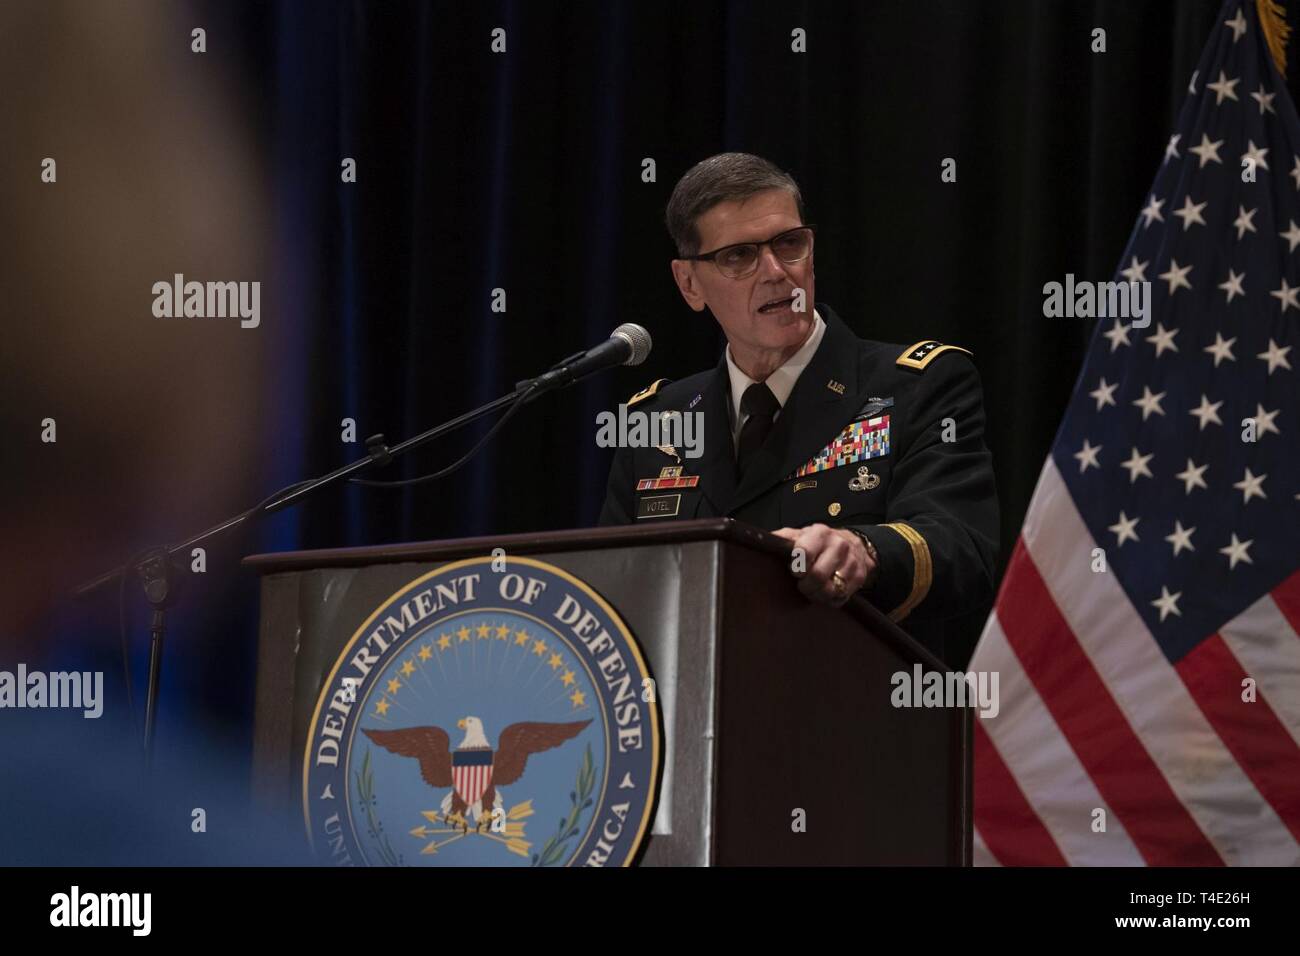 The outgoing commander of U.S. Central Command, U.S. Army Gen. Joseph L. Votel, delivers remarks at the Centcom change of command, where U.S. Marine Corps Gen. Kenneth F. McKenzie Jr. became the new Centcom commander, Tampa, Florida, March 28, 2019. Stock Photo